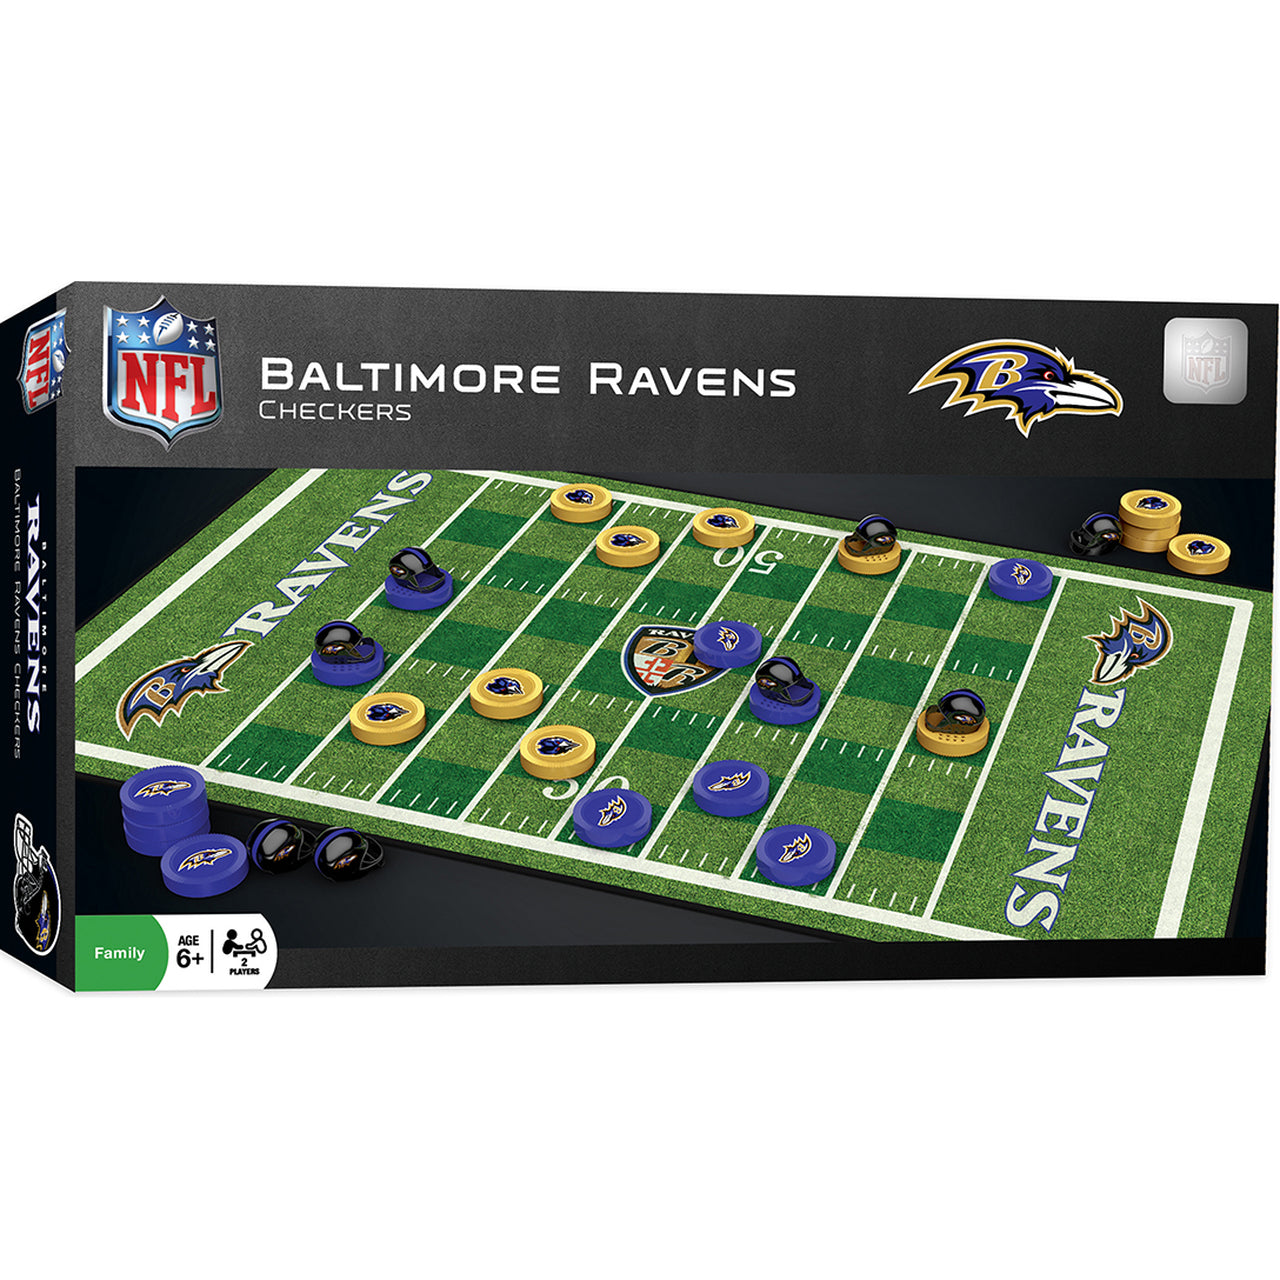 Baltimore Ravens Checkers Board Game by Masterpieces